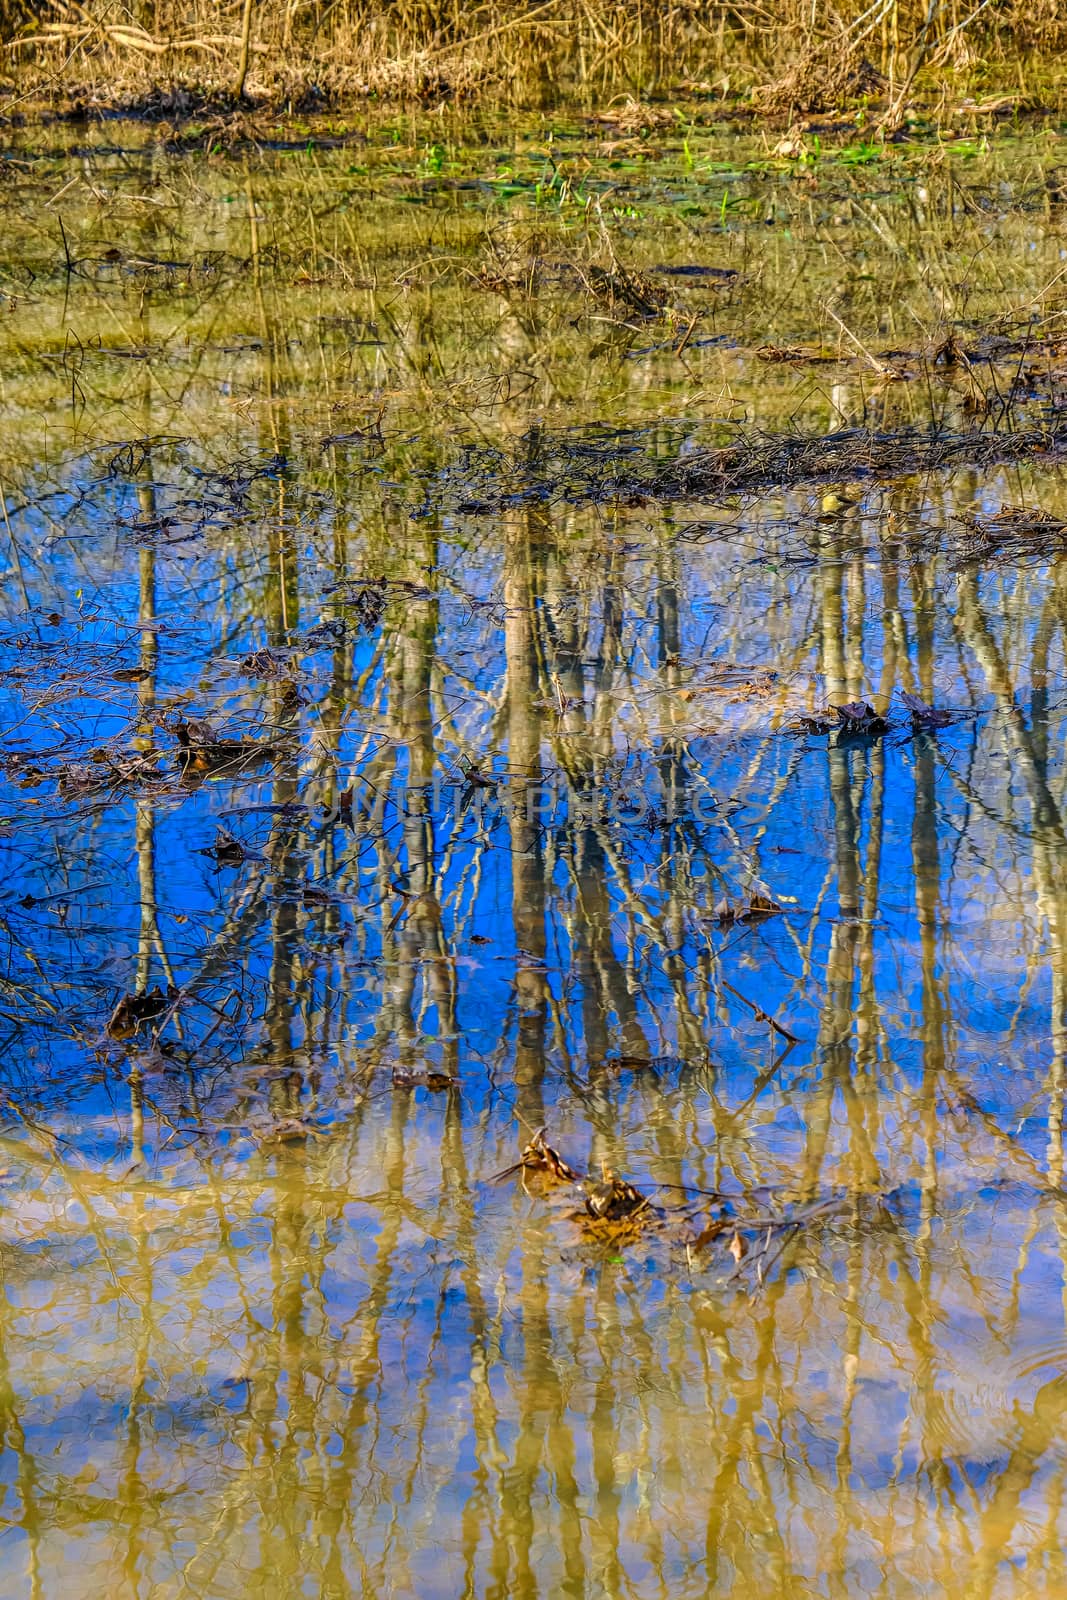 Sky Reflected in Flood Waters after Winter Rain